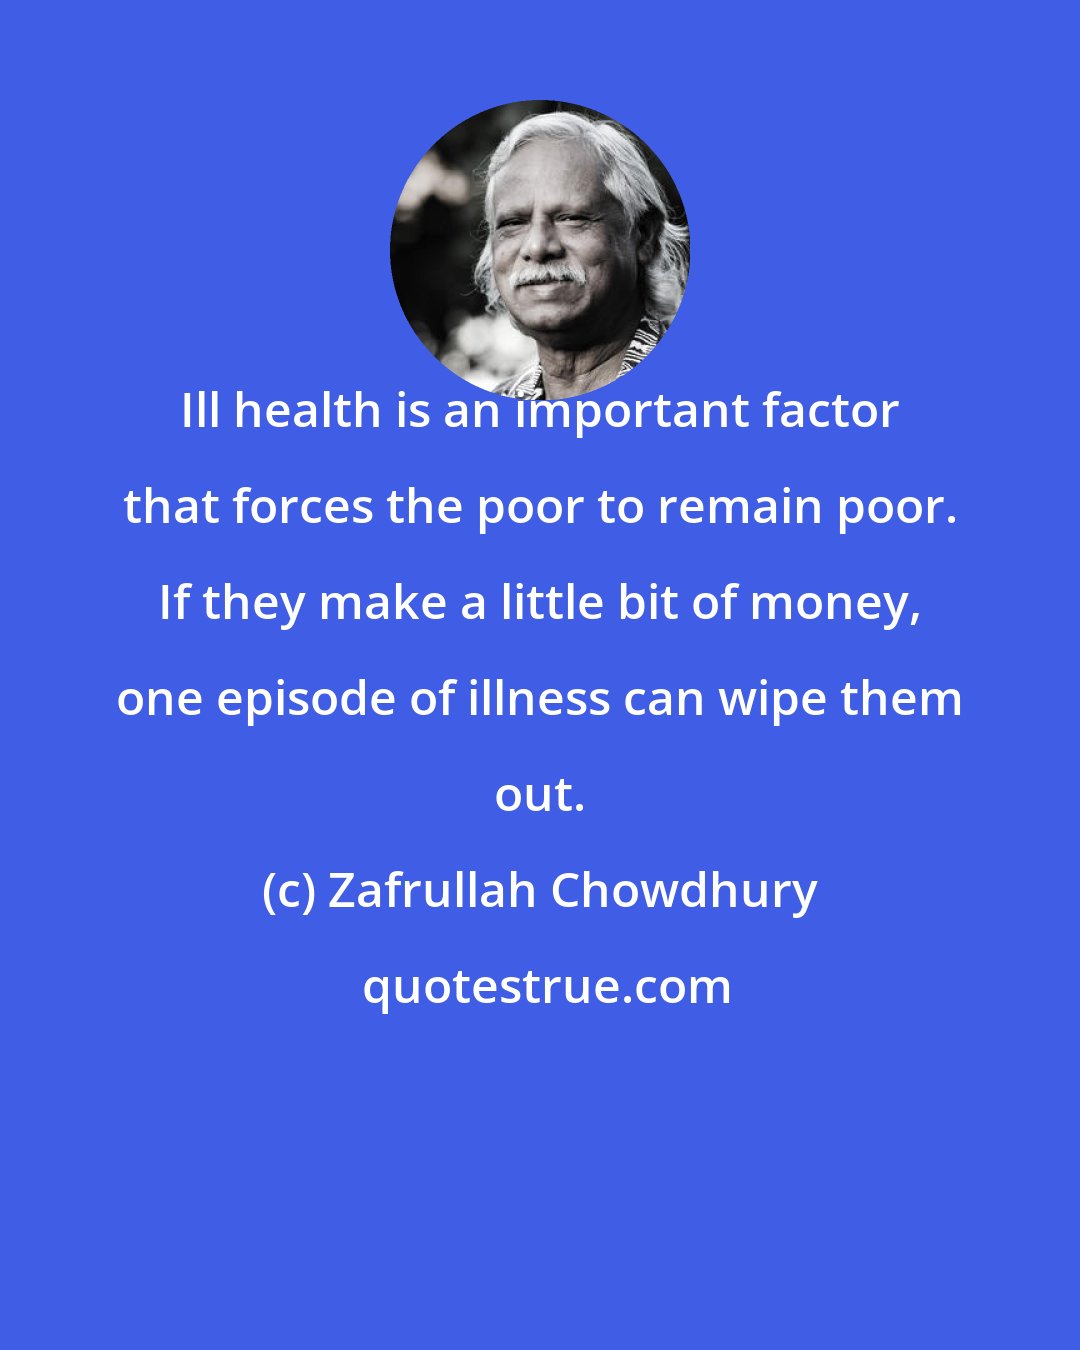 Zafrullah Chowdhury: Ill health is an important factor that forces the poor to remain poor. If they make a little bit of money, one episode of illness can wipe them out.